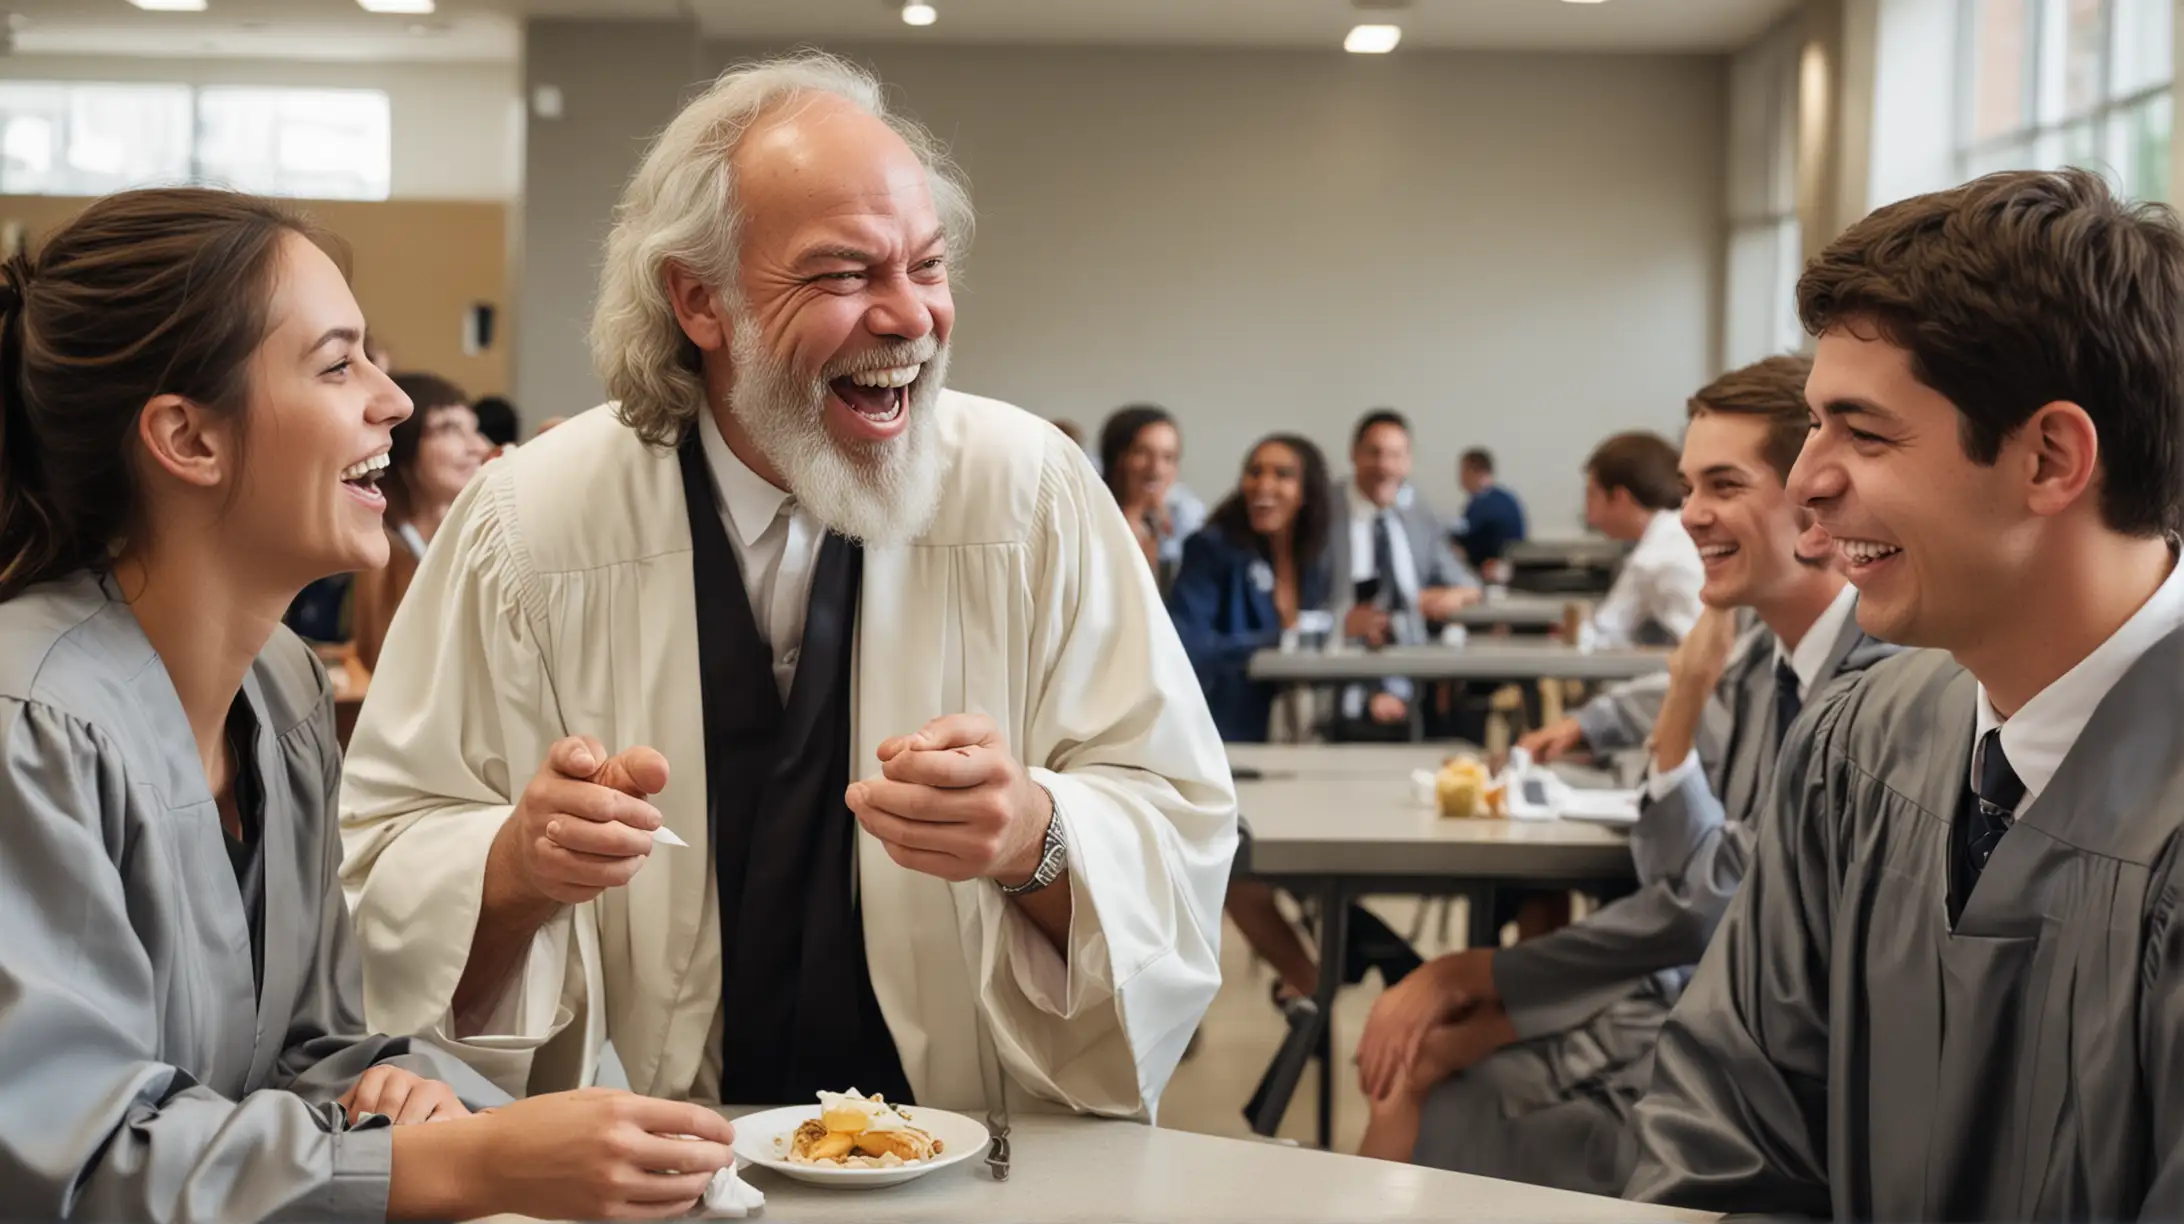 Socrates Laughing with Young People Modern Campus Cafeteria Scene